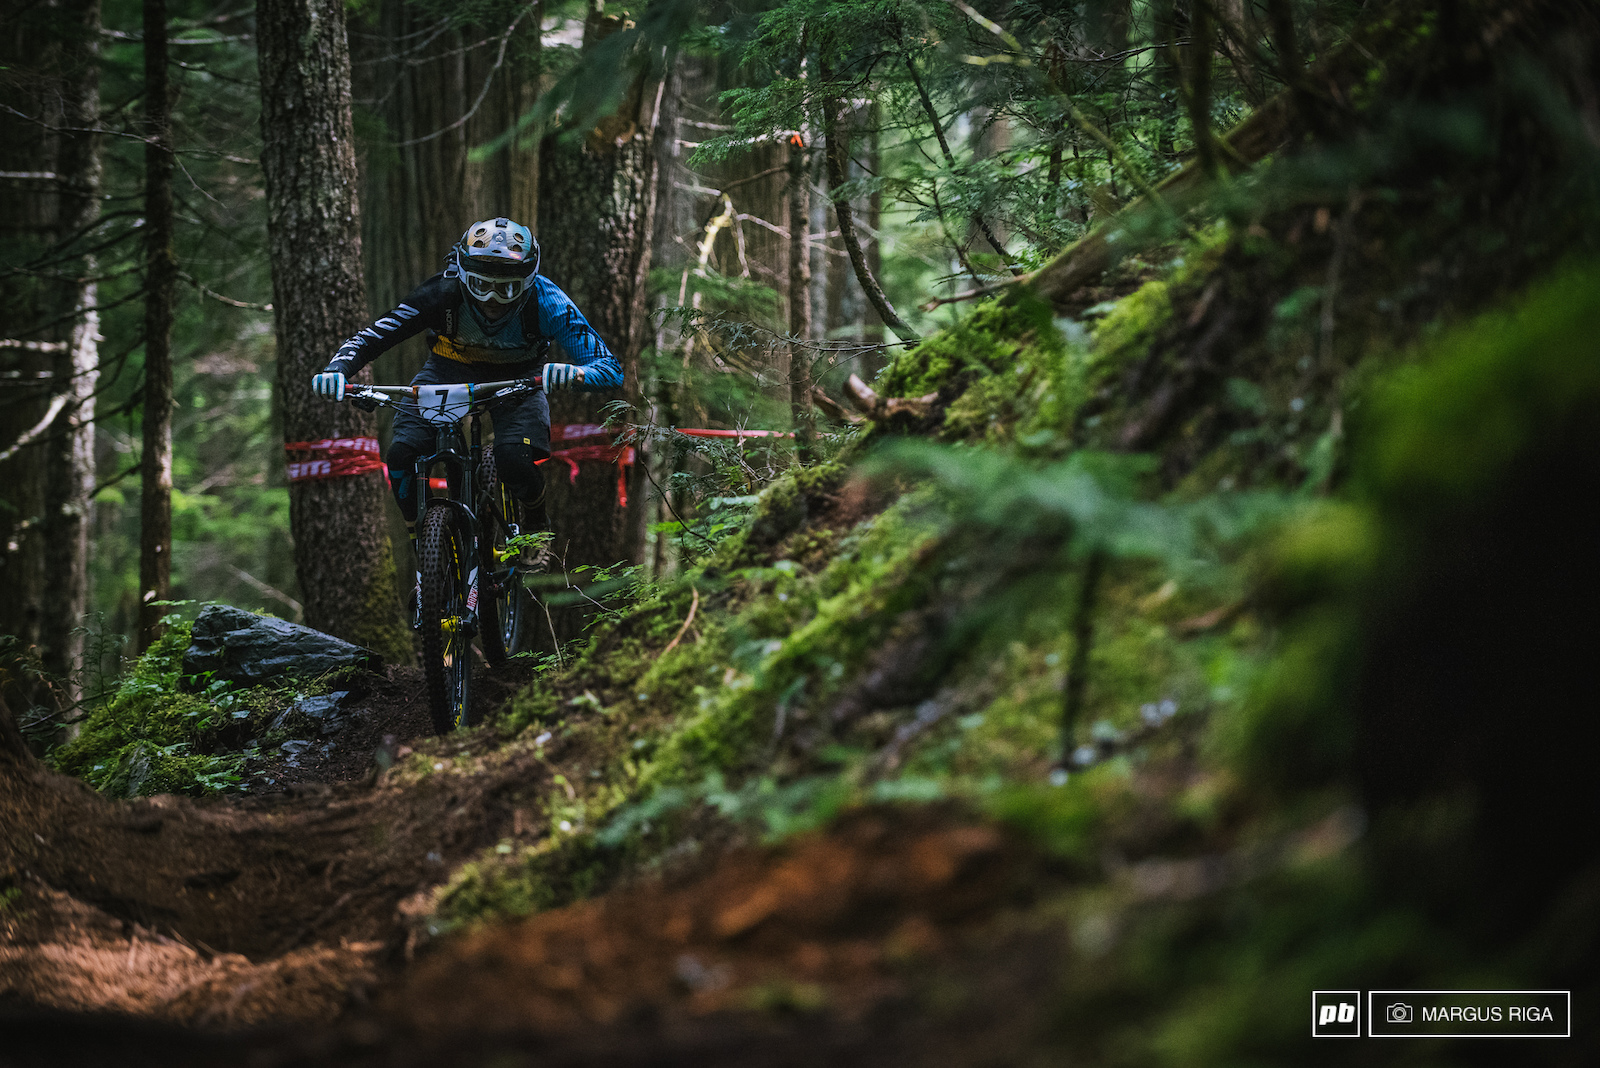 Joe Barnes was on the hunt again for EWS podium. Sixth for the day beating out his teammate Fabien Barel by 1.5 seconds...pretty darn close for fifty minutes of racing.